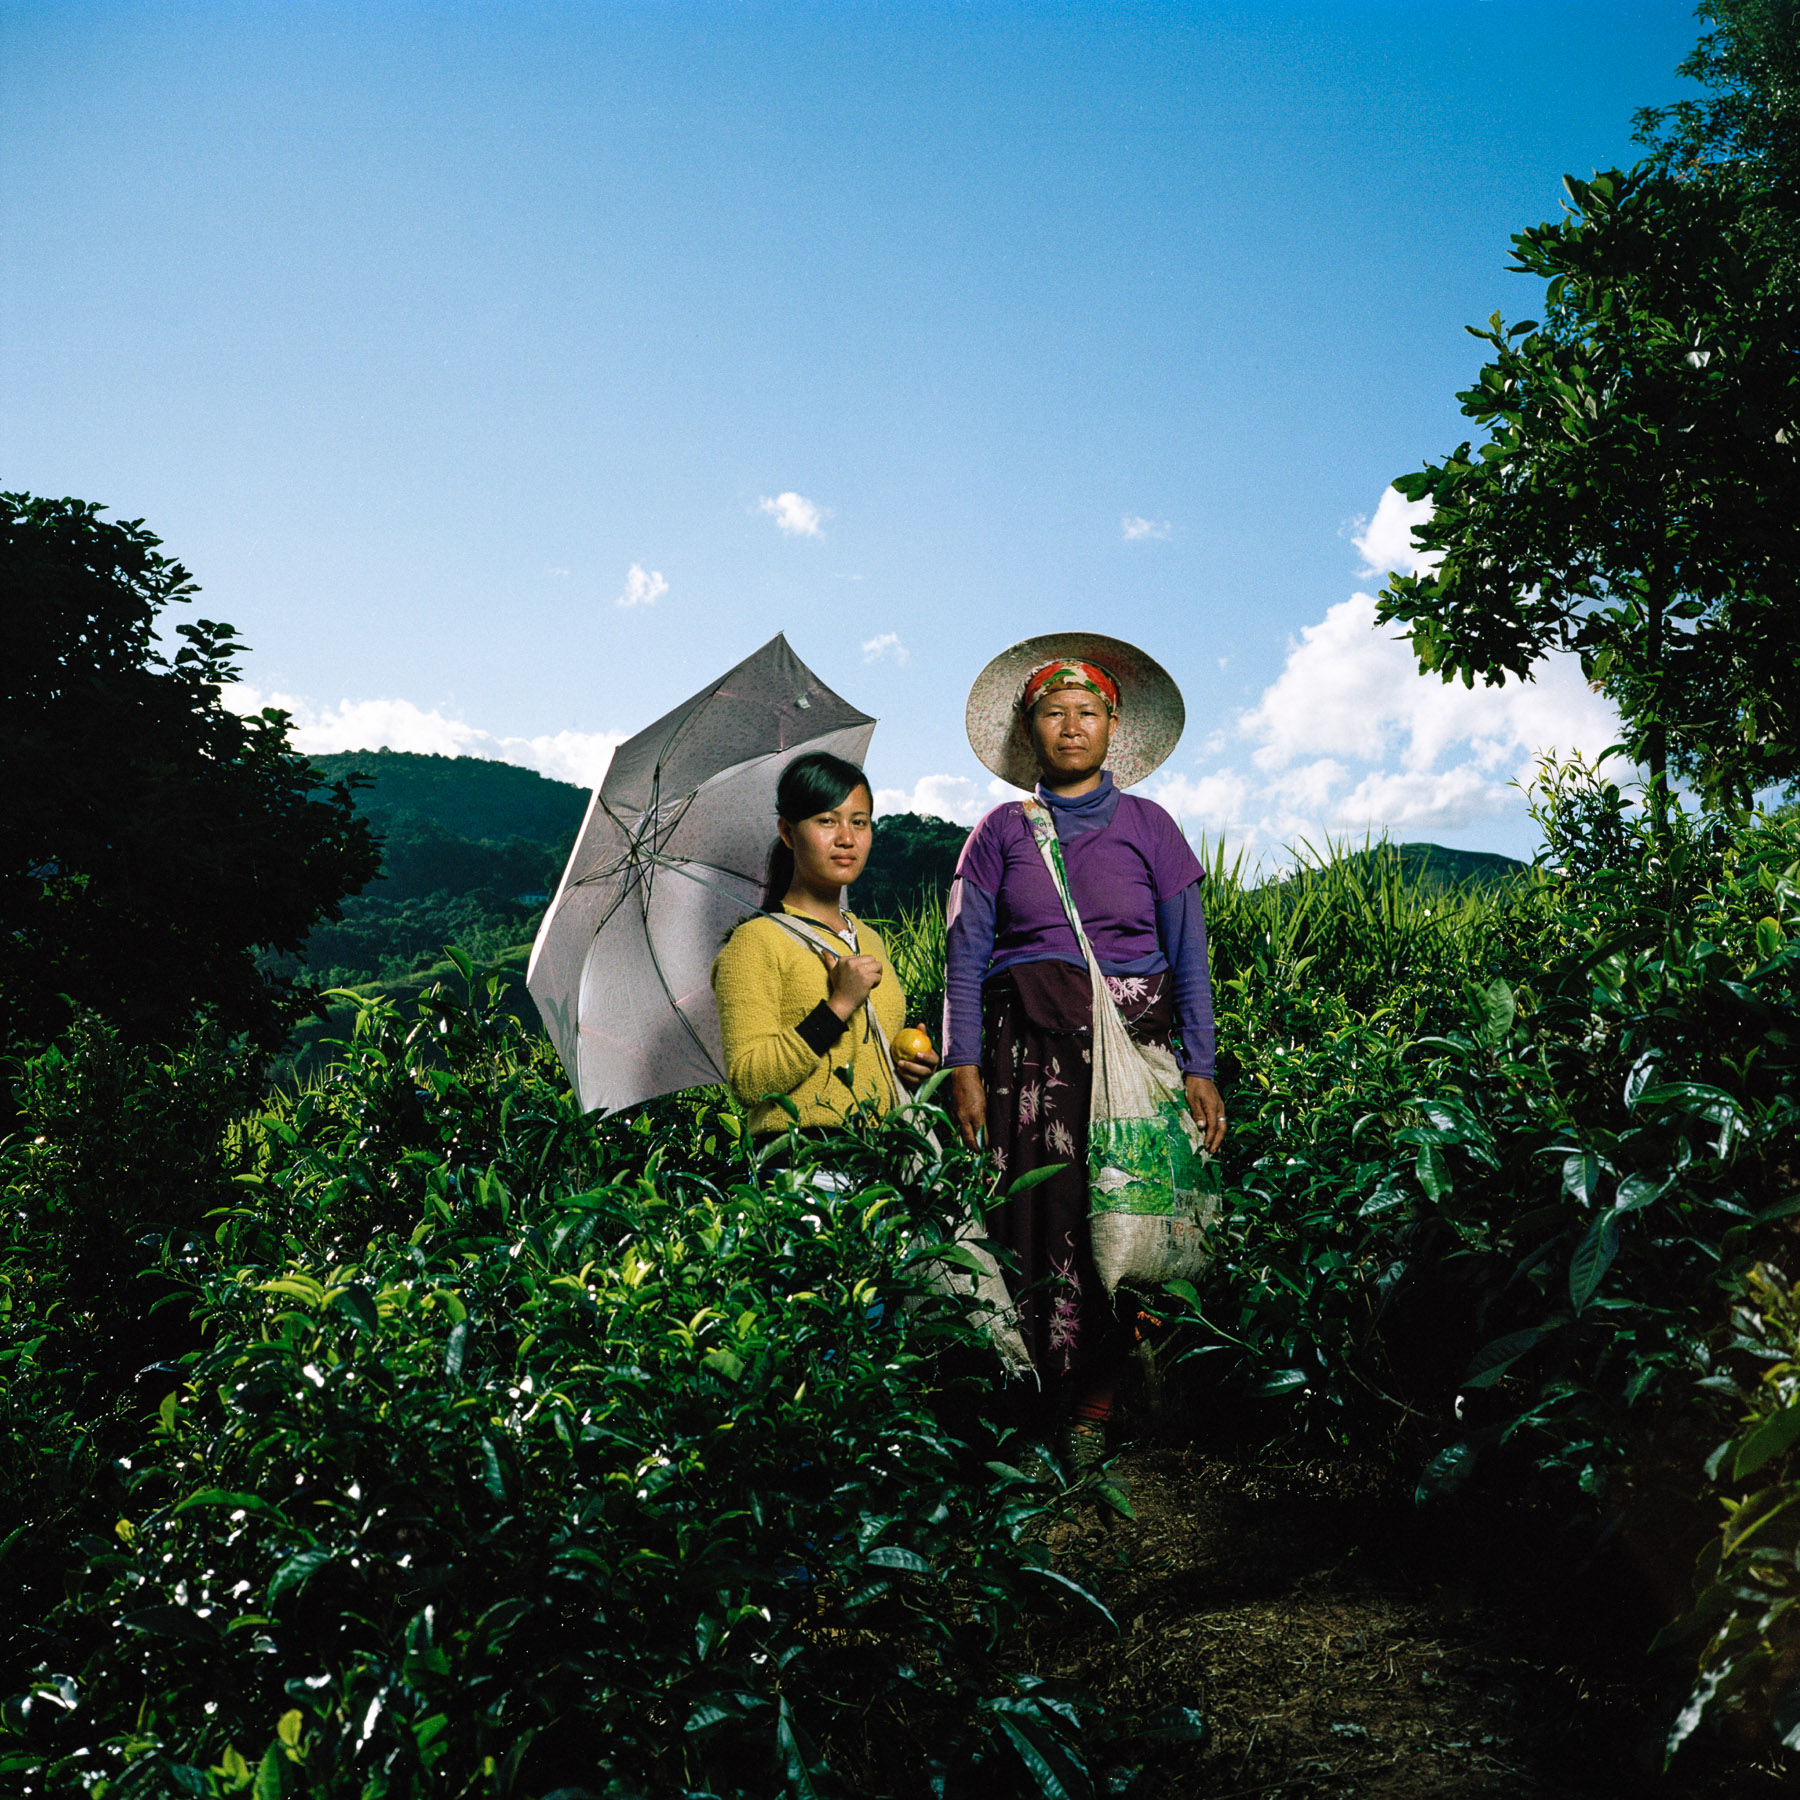  China, Yunnan province. Southern region of Xishuangbanna. November 2nd 2013. Yu Jiao Gang is an 18-year old high school student from the Bulang minority. She is pictured with her 48-year old mother who is a tea farmer. 